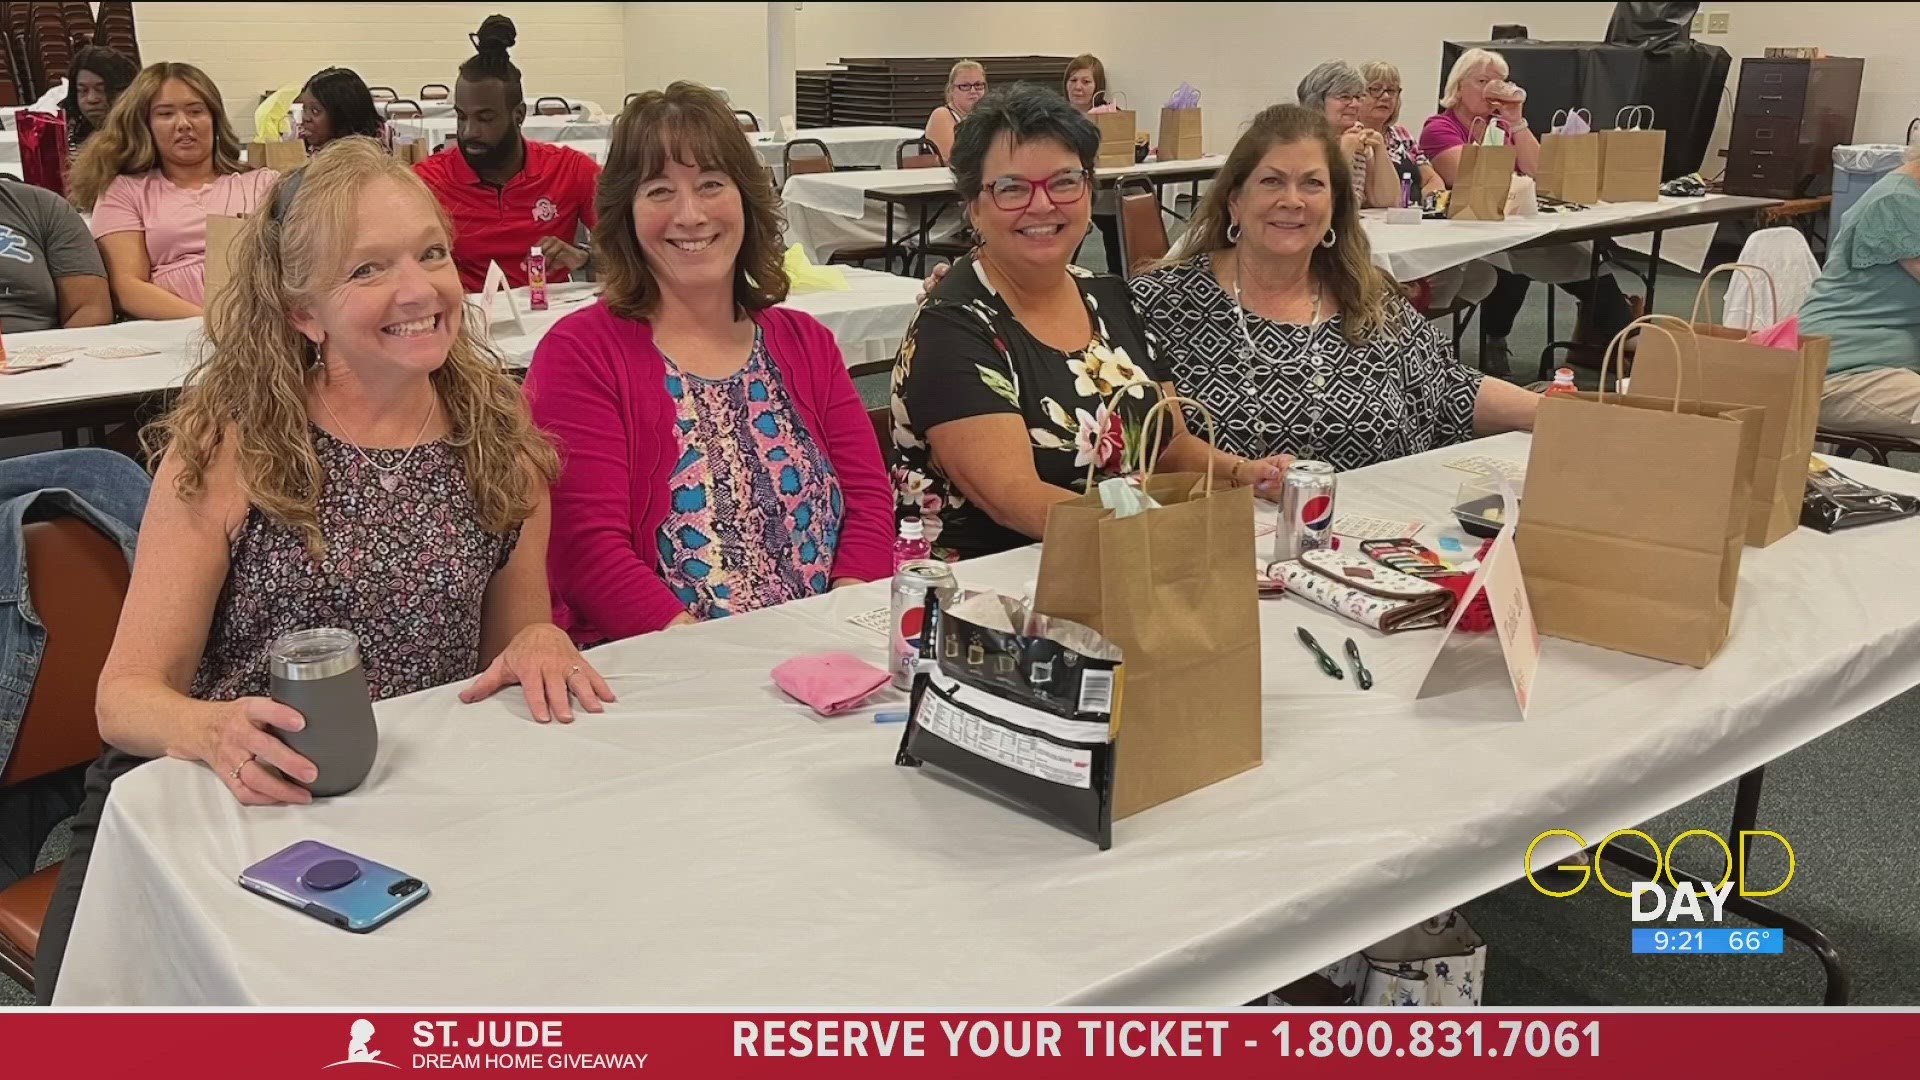 Power of the Purse: Generosity with Style! | United Way of Champaign County